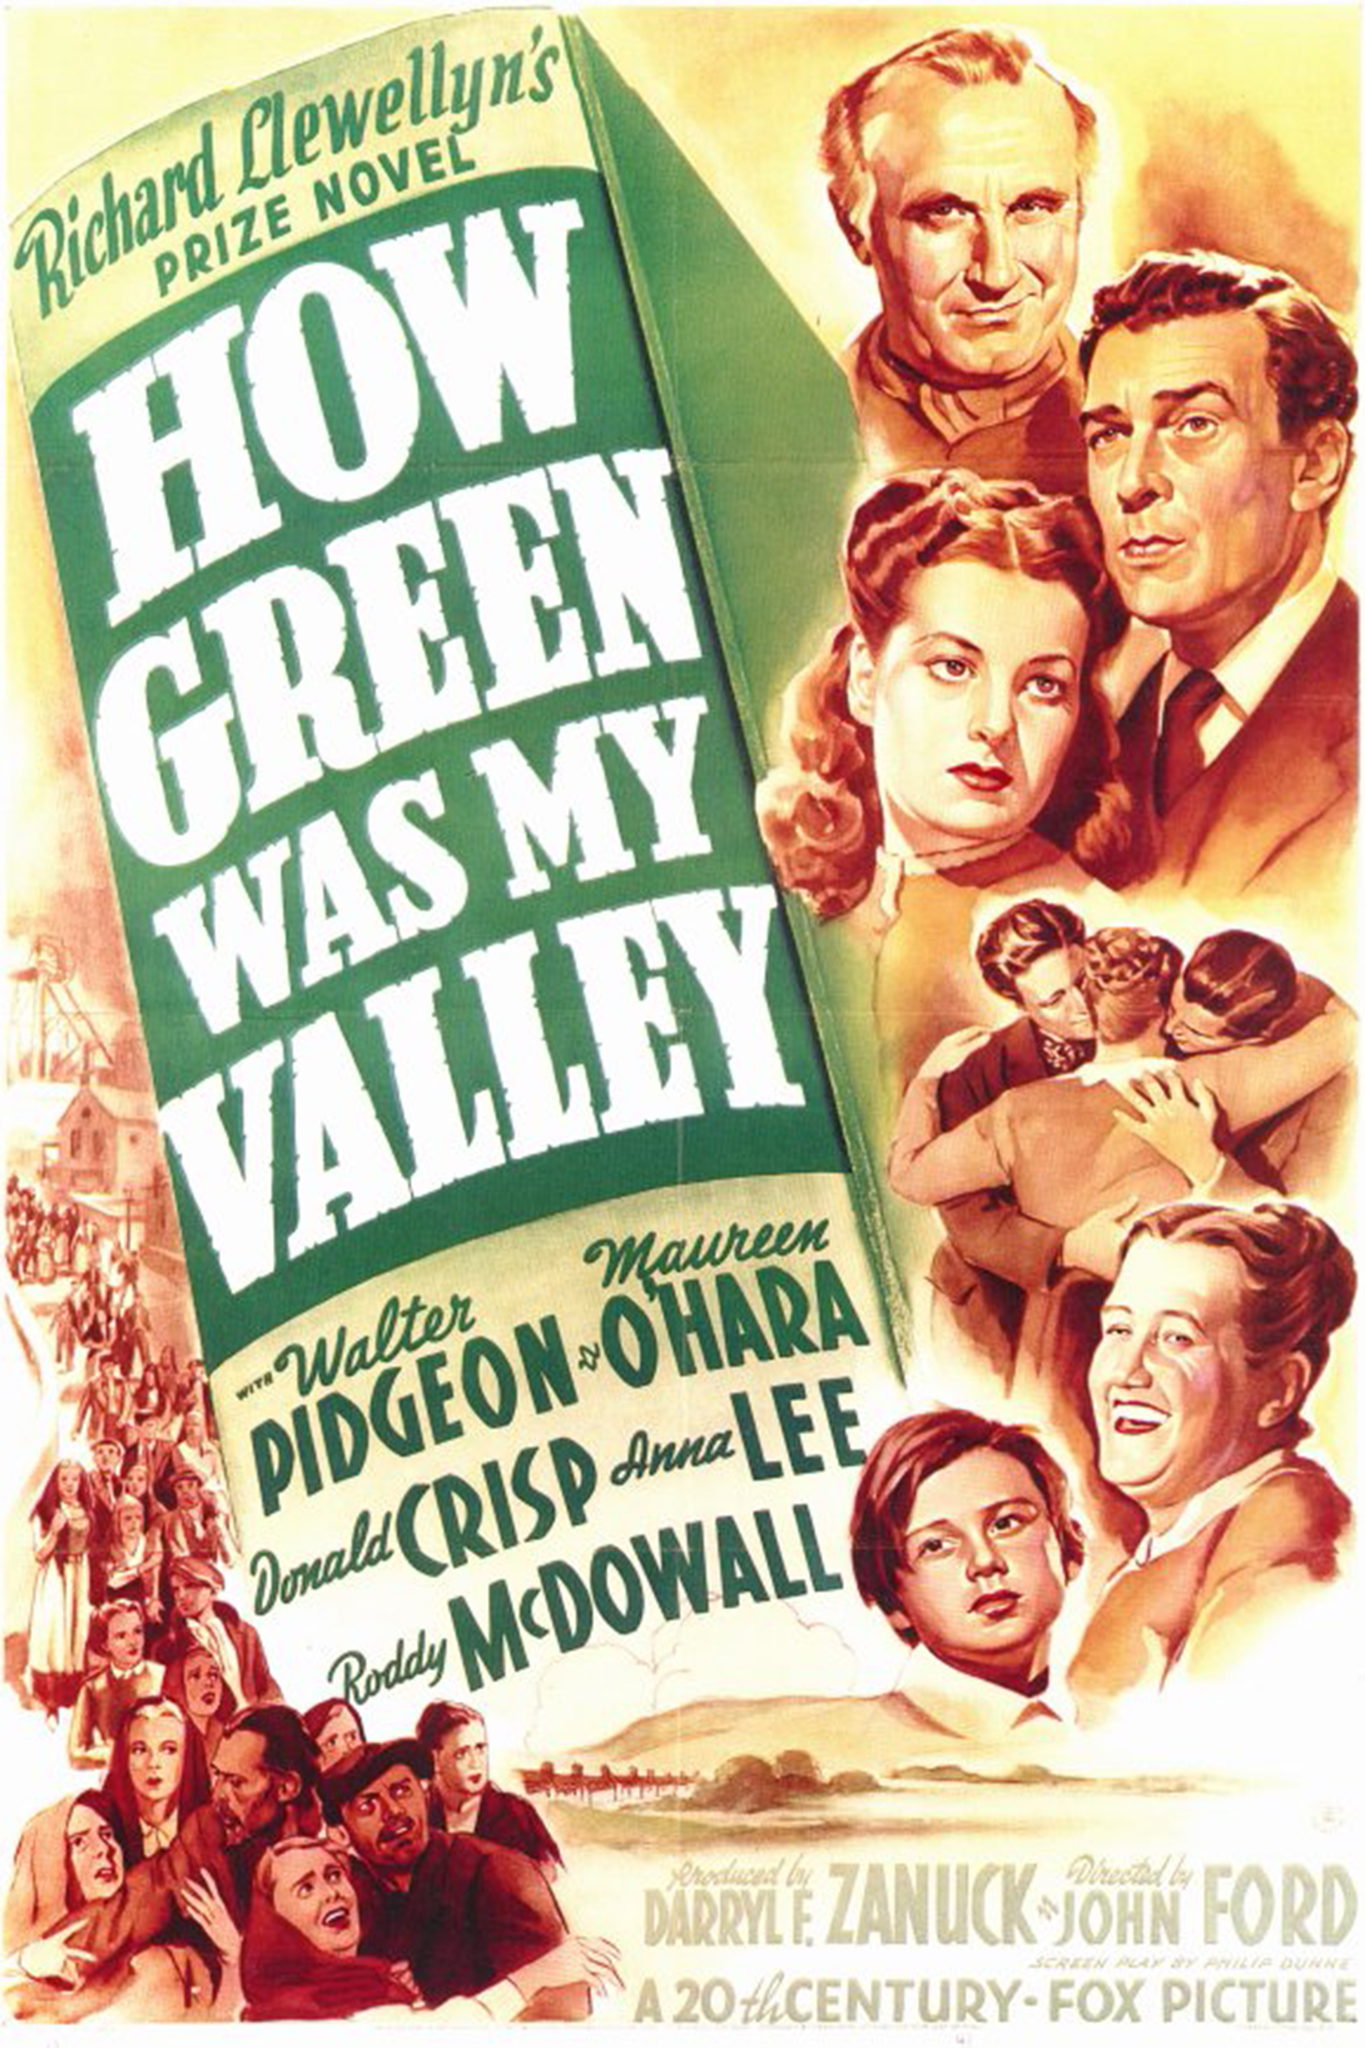 oscars-wrong-how-green-was-my-valley.jpg